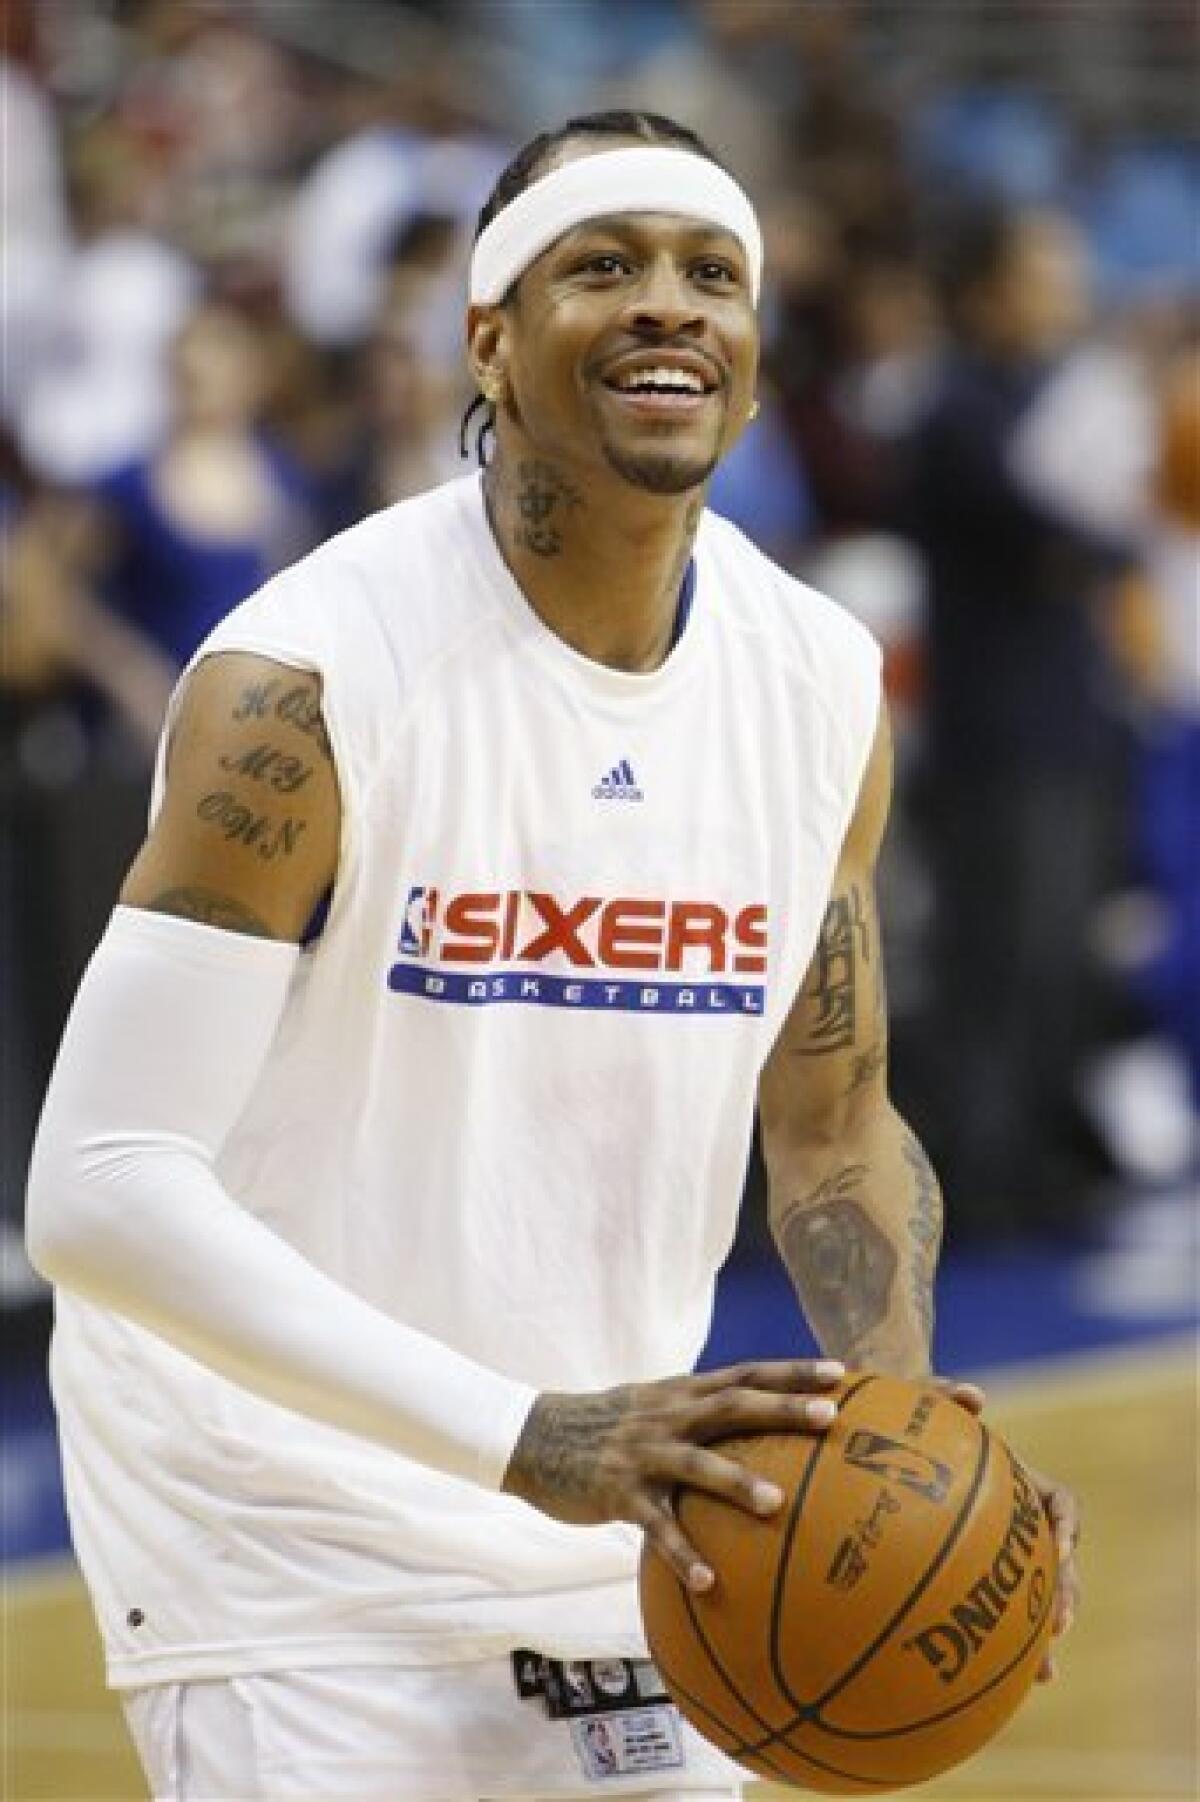 Emotional Allen Iverson marks Philly return - The San Diego Union